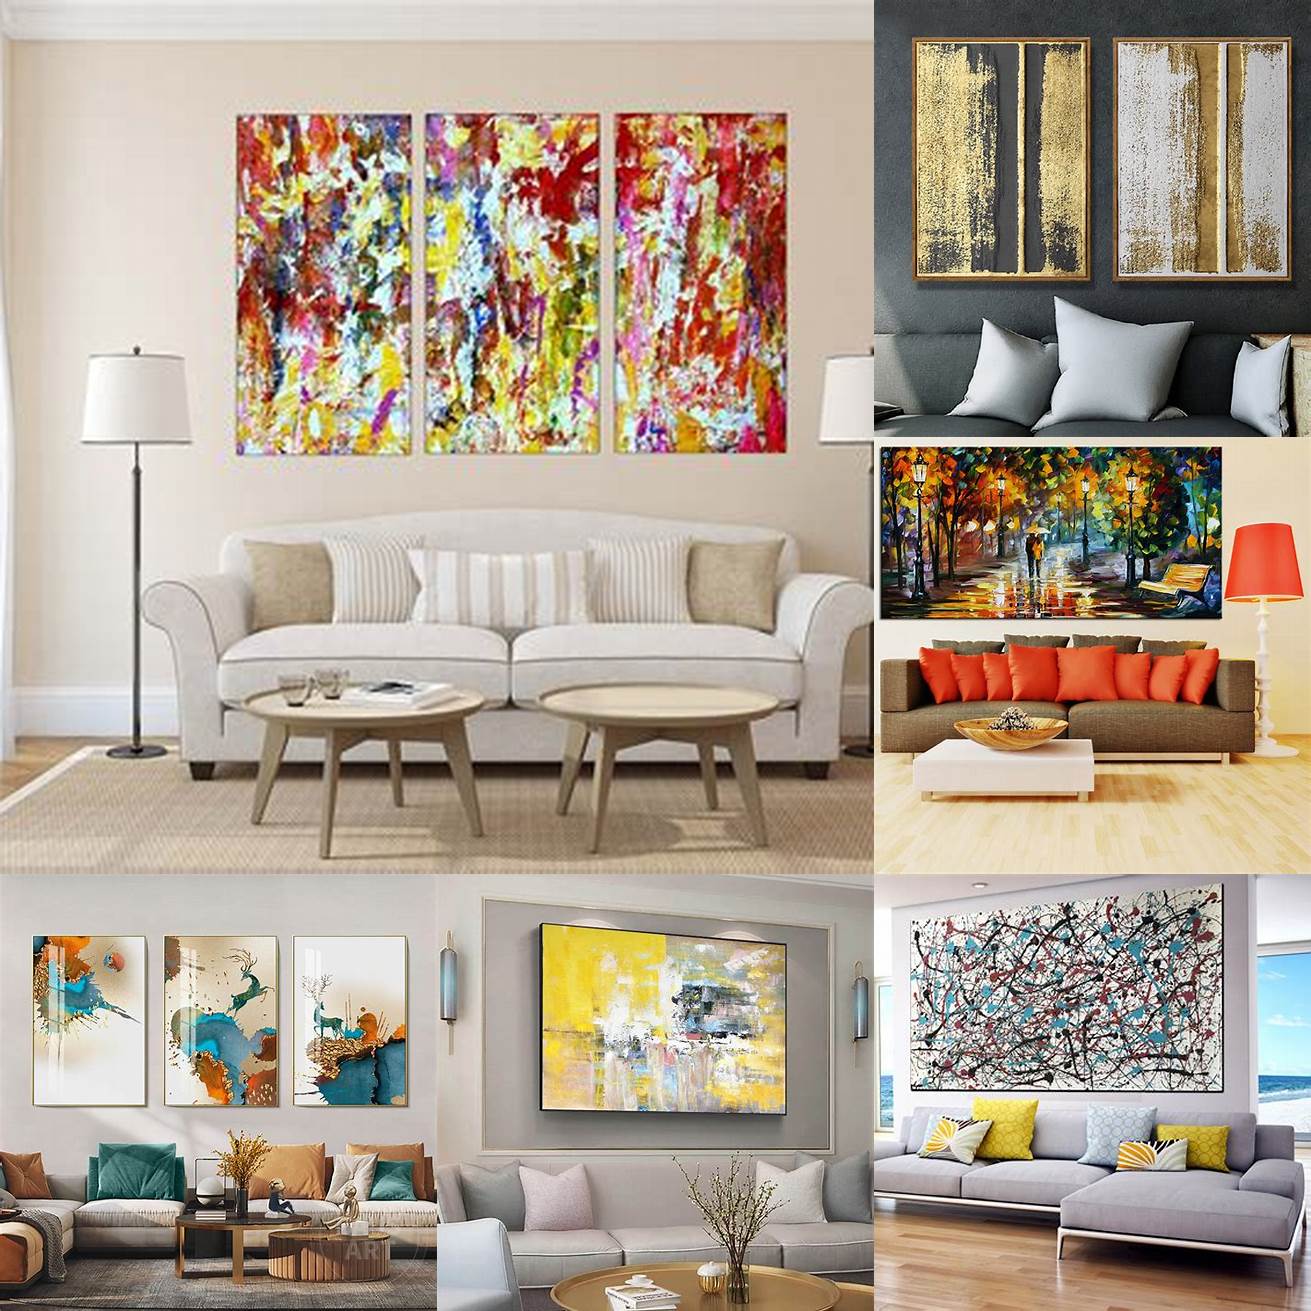 Wall art Abstract paintings vintage posters or custom prints can add personality to any room